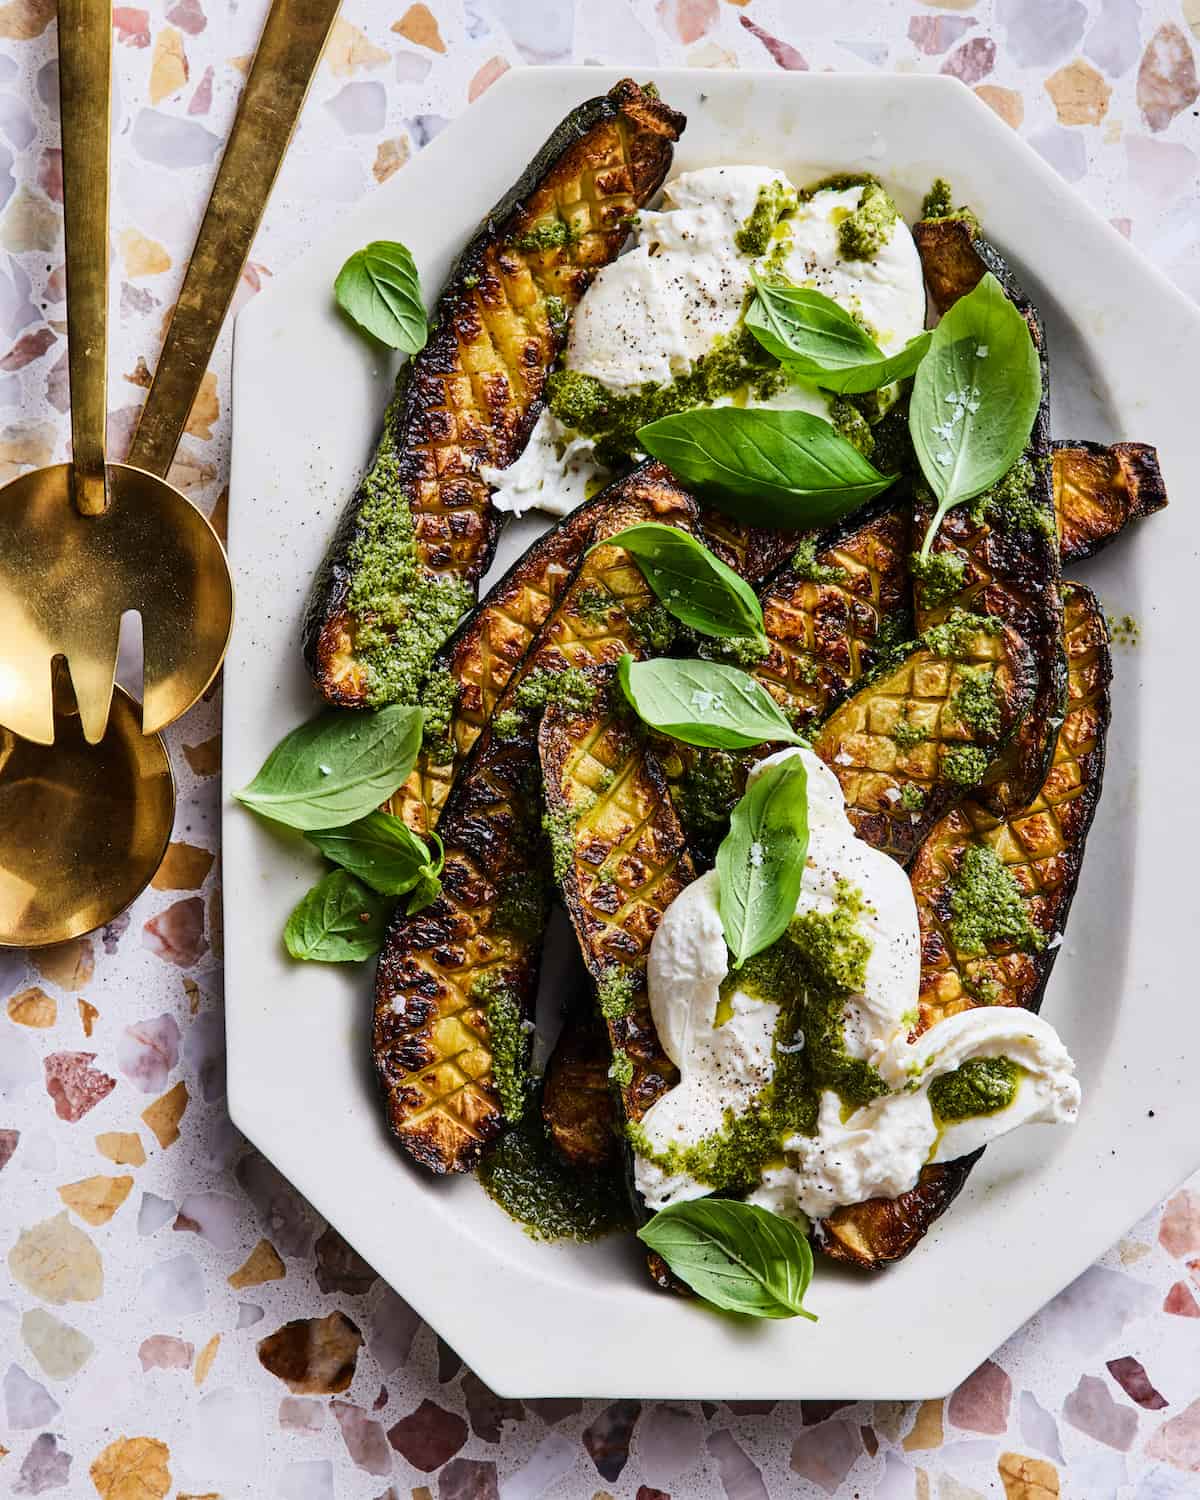 Thomas Keller's Zucchini with Burrata and Pesto on a platter with serving spoons